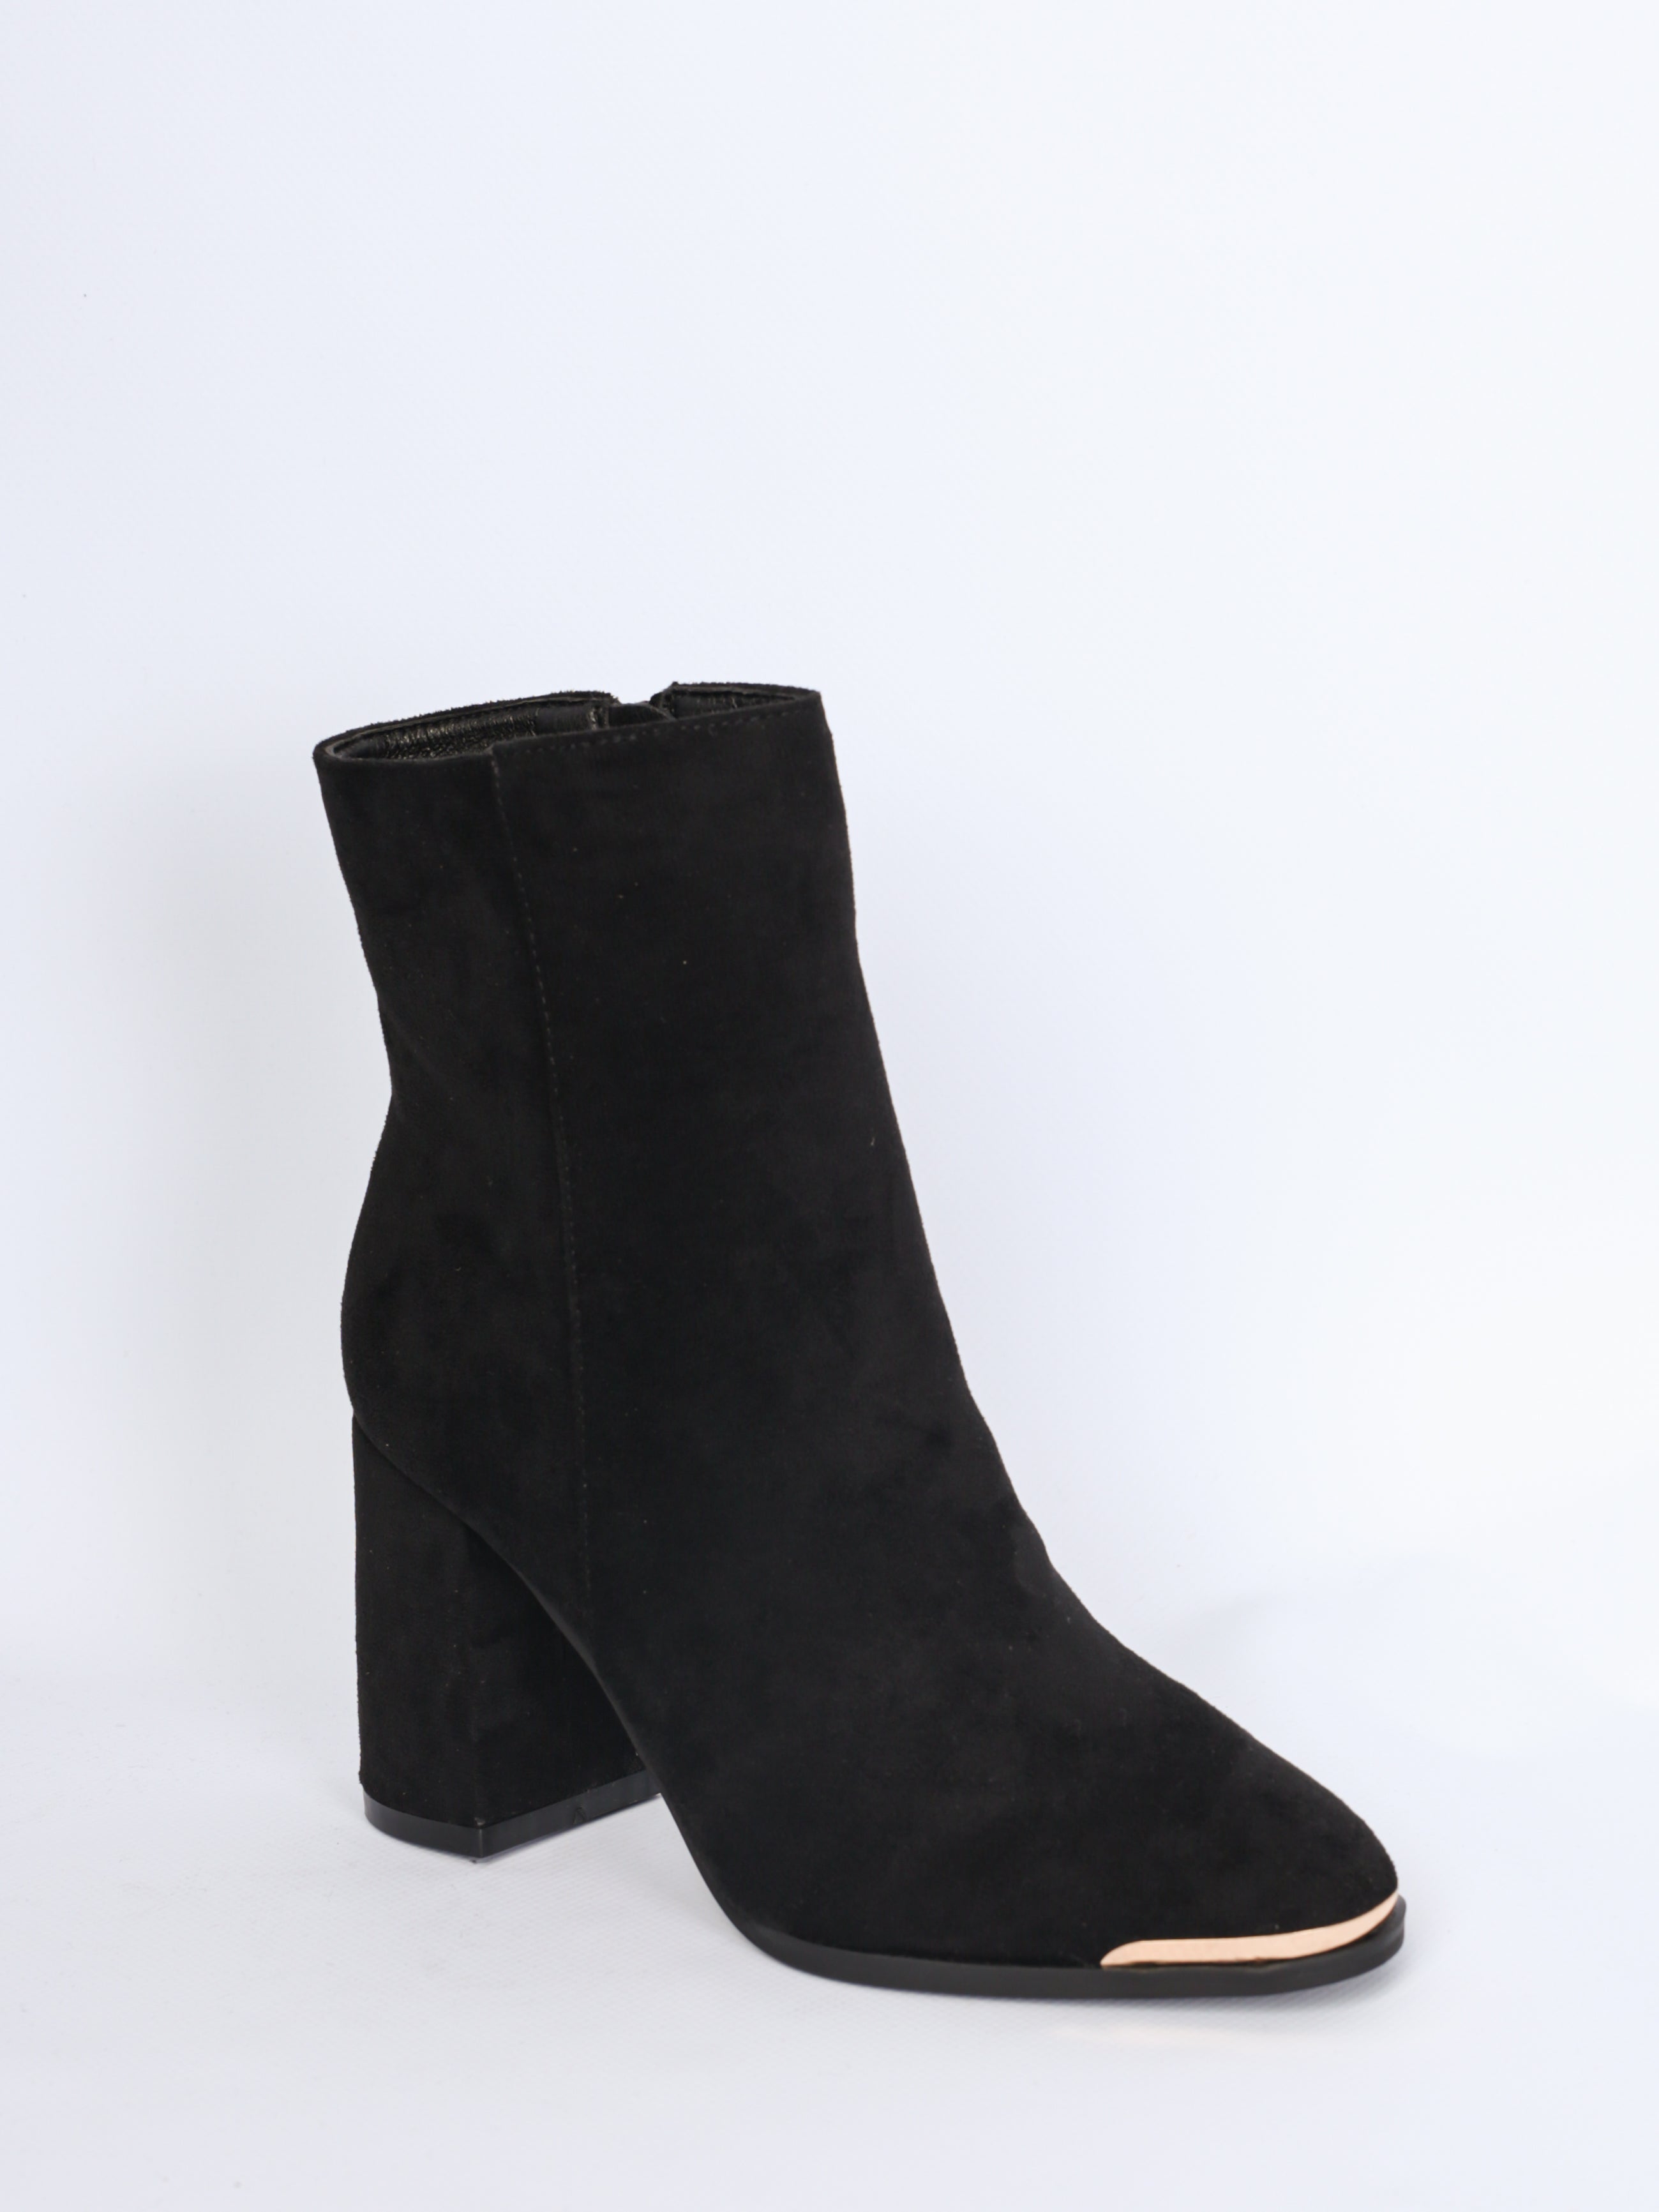 Imitation suede boots with gold detail